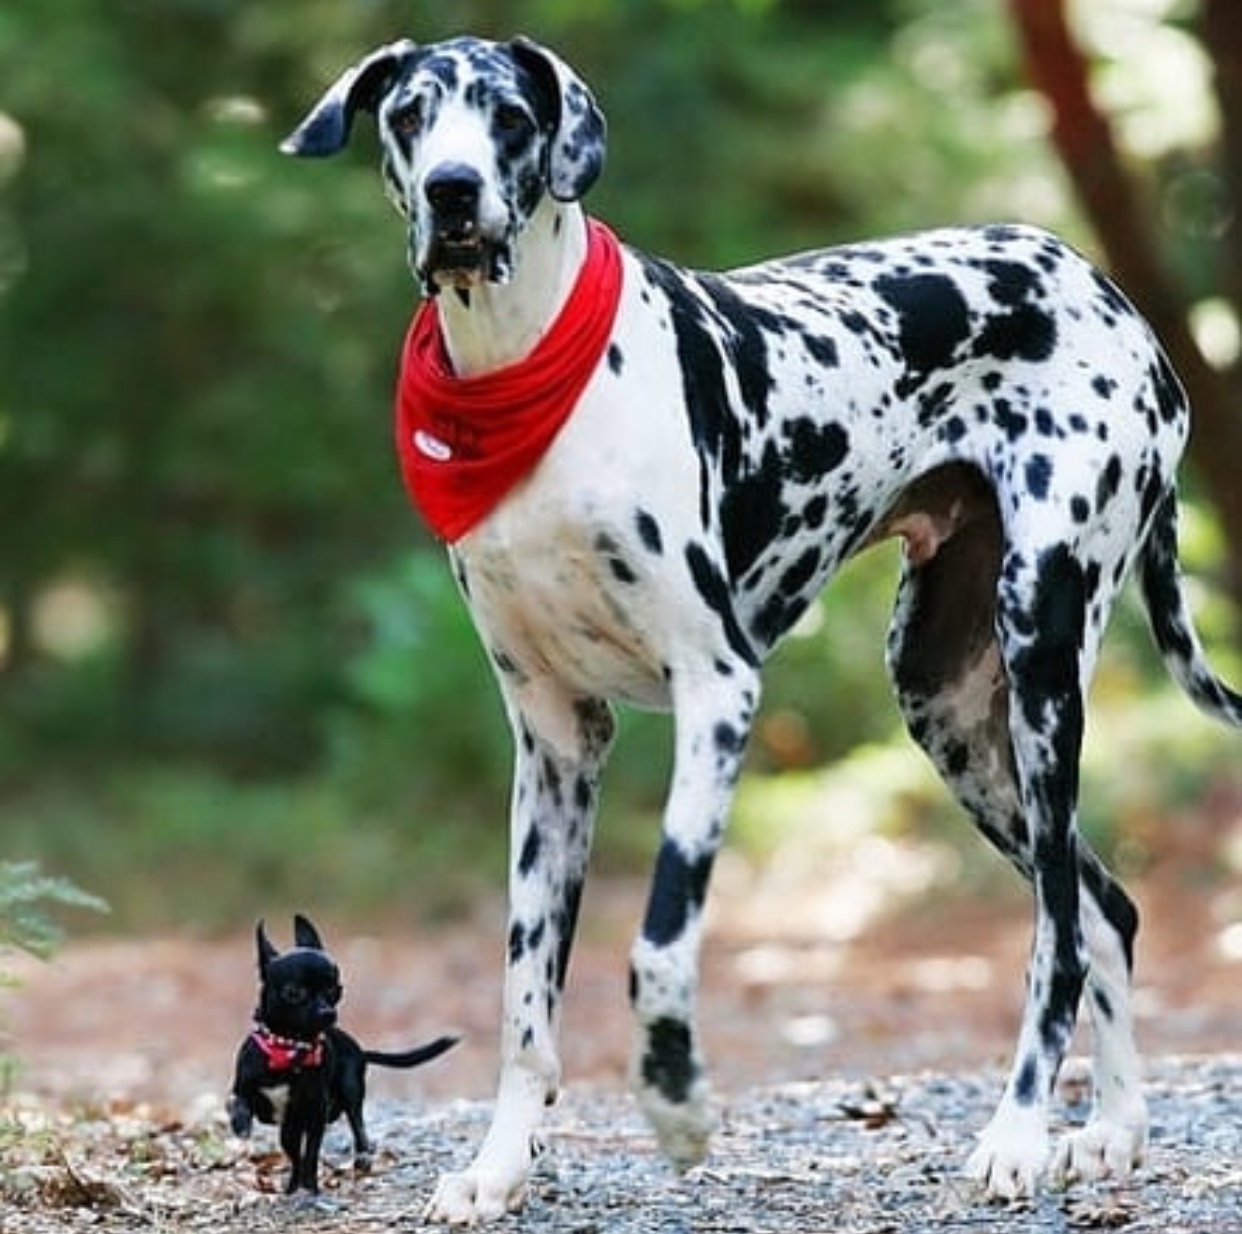 A Great Dane walking in the forest next to black chihuahua